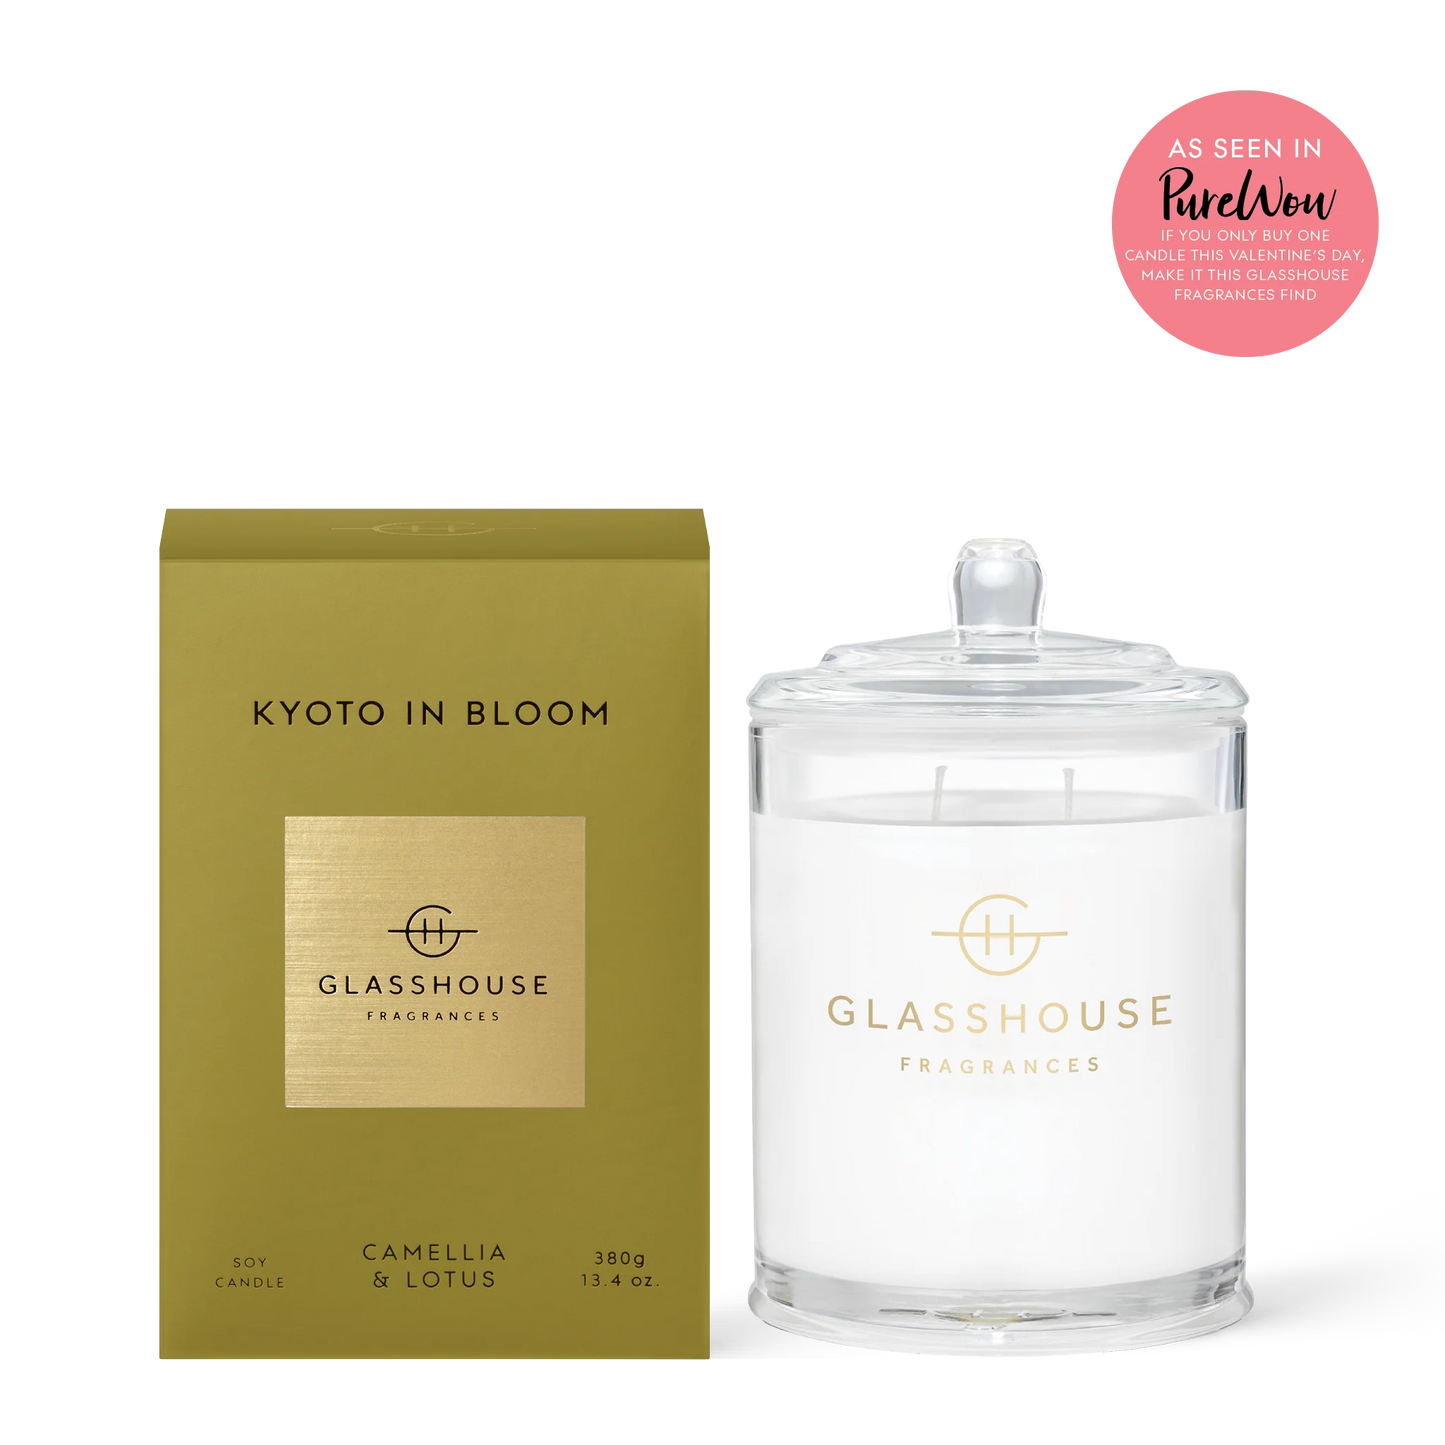 13.4oz. Candle - Kyoto In Bloom